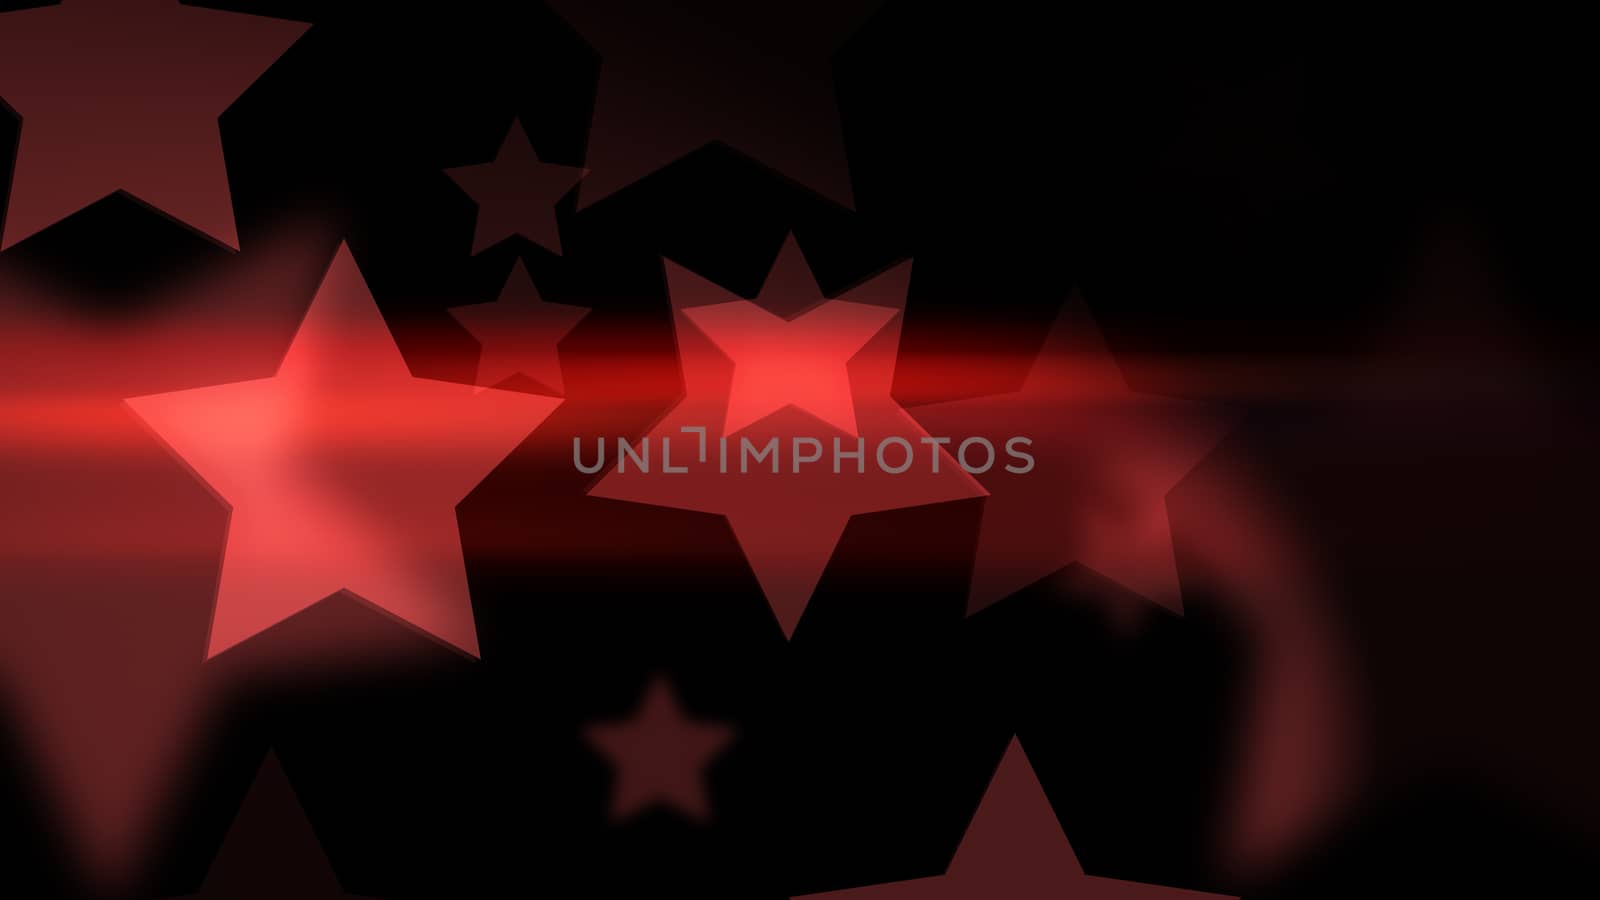 Exiting 2d illustration of film bokeh with retro stars shaped on the black background. Suitable for holiday